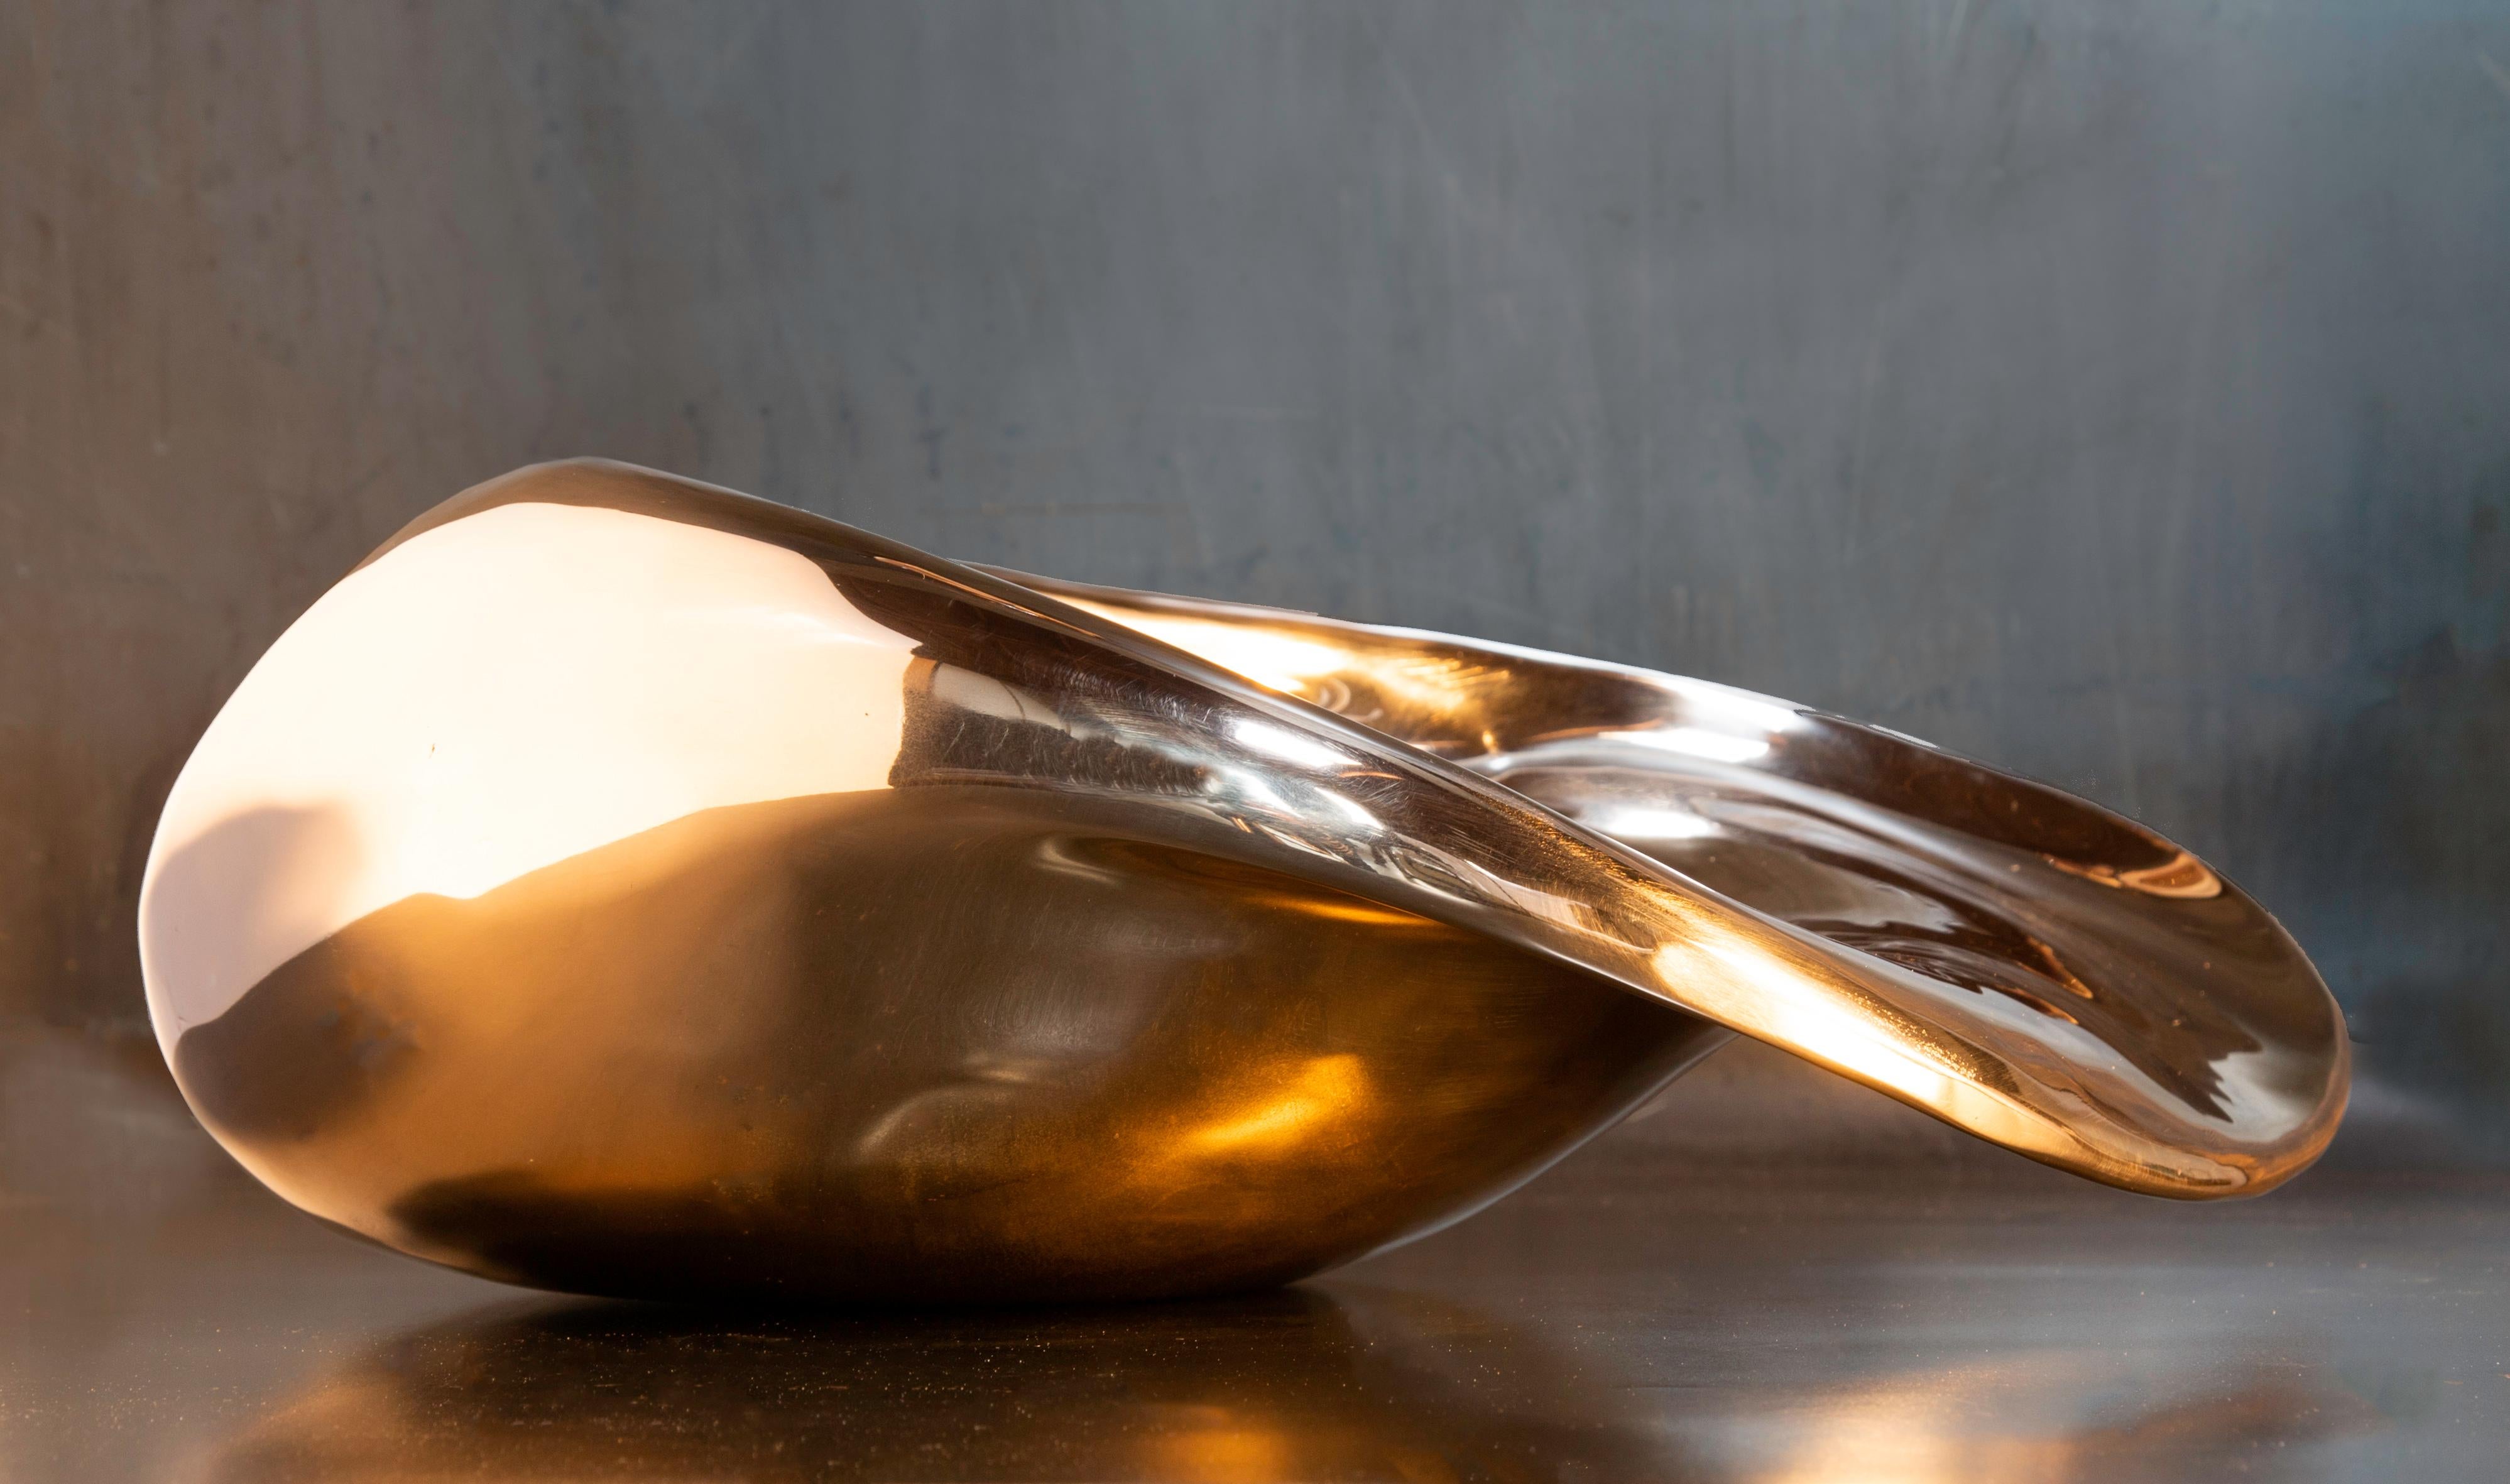 Bronze H57 Bowl / Vase in Polished Recycled Cast Aluminum, by Jordan Mozer, USA, 2007 For Sale